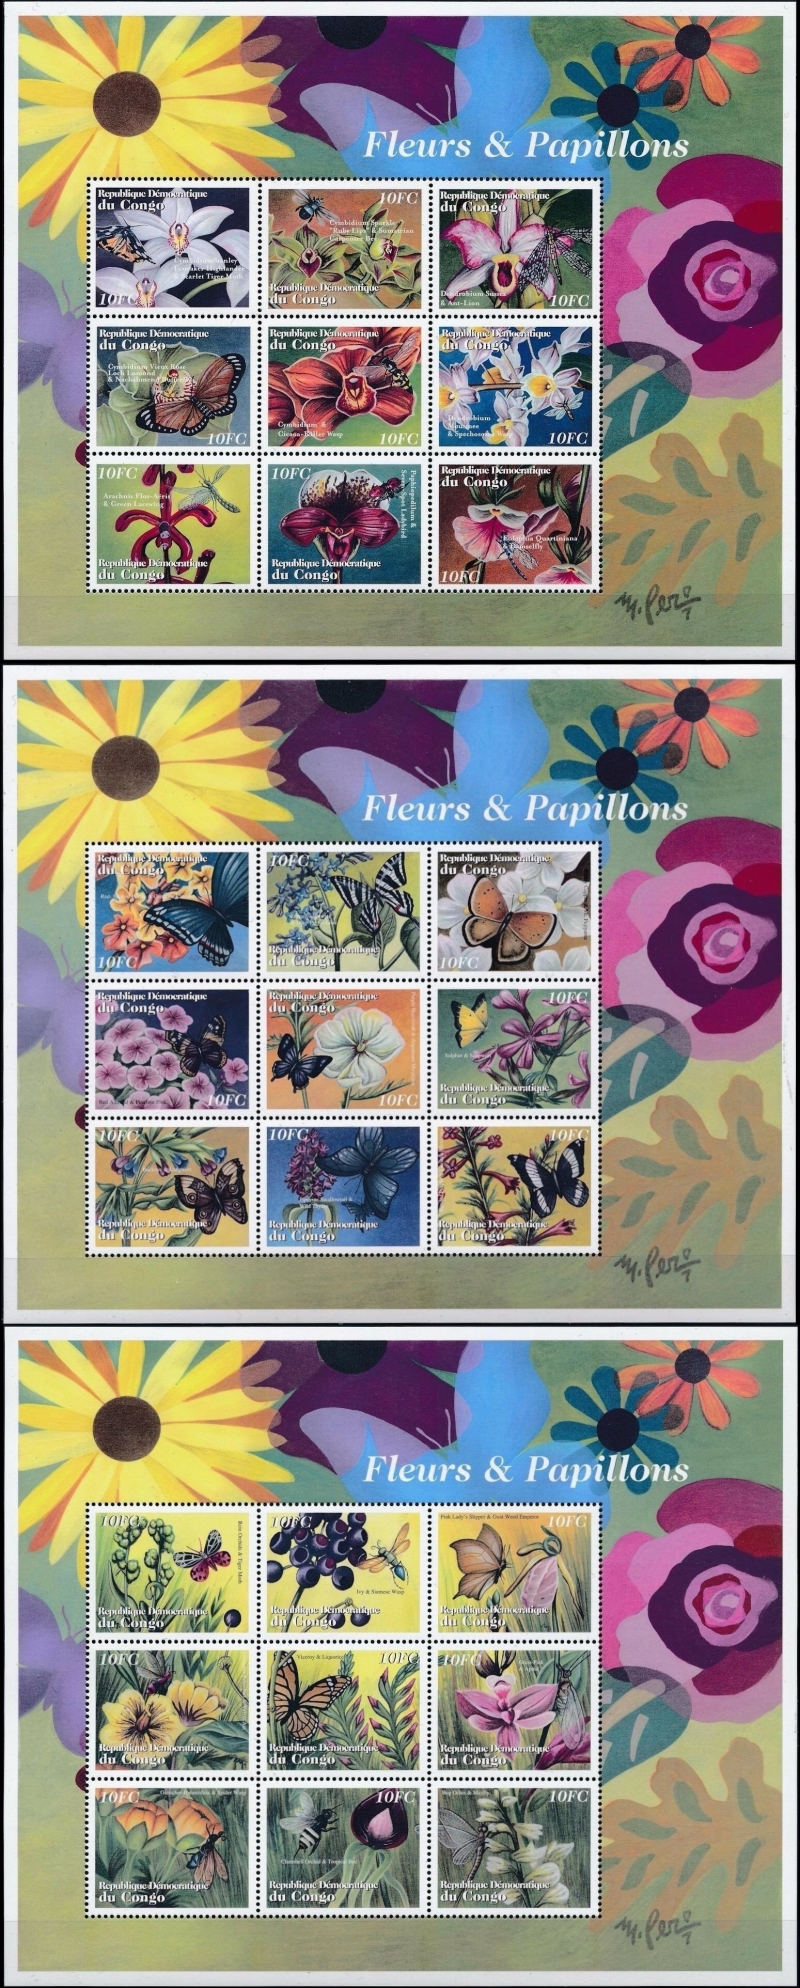 Congo Democratic Republic 2001 Flowers and Insects Sheets of 9 Scott Number 1607-1609